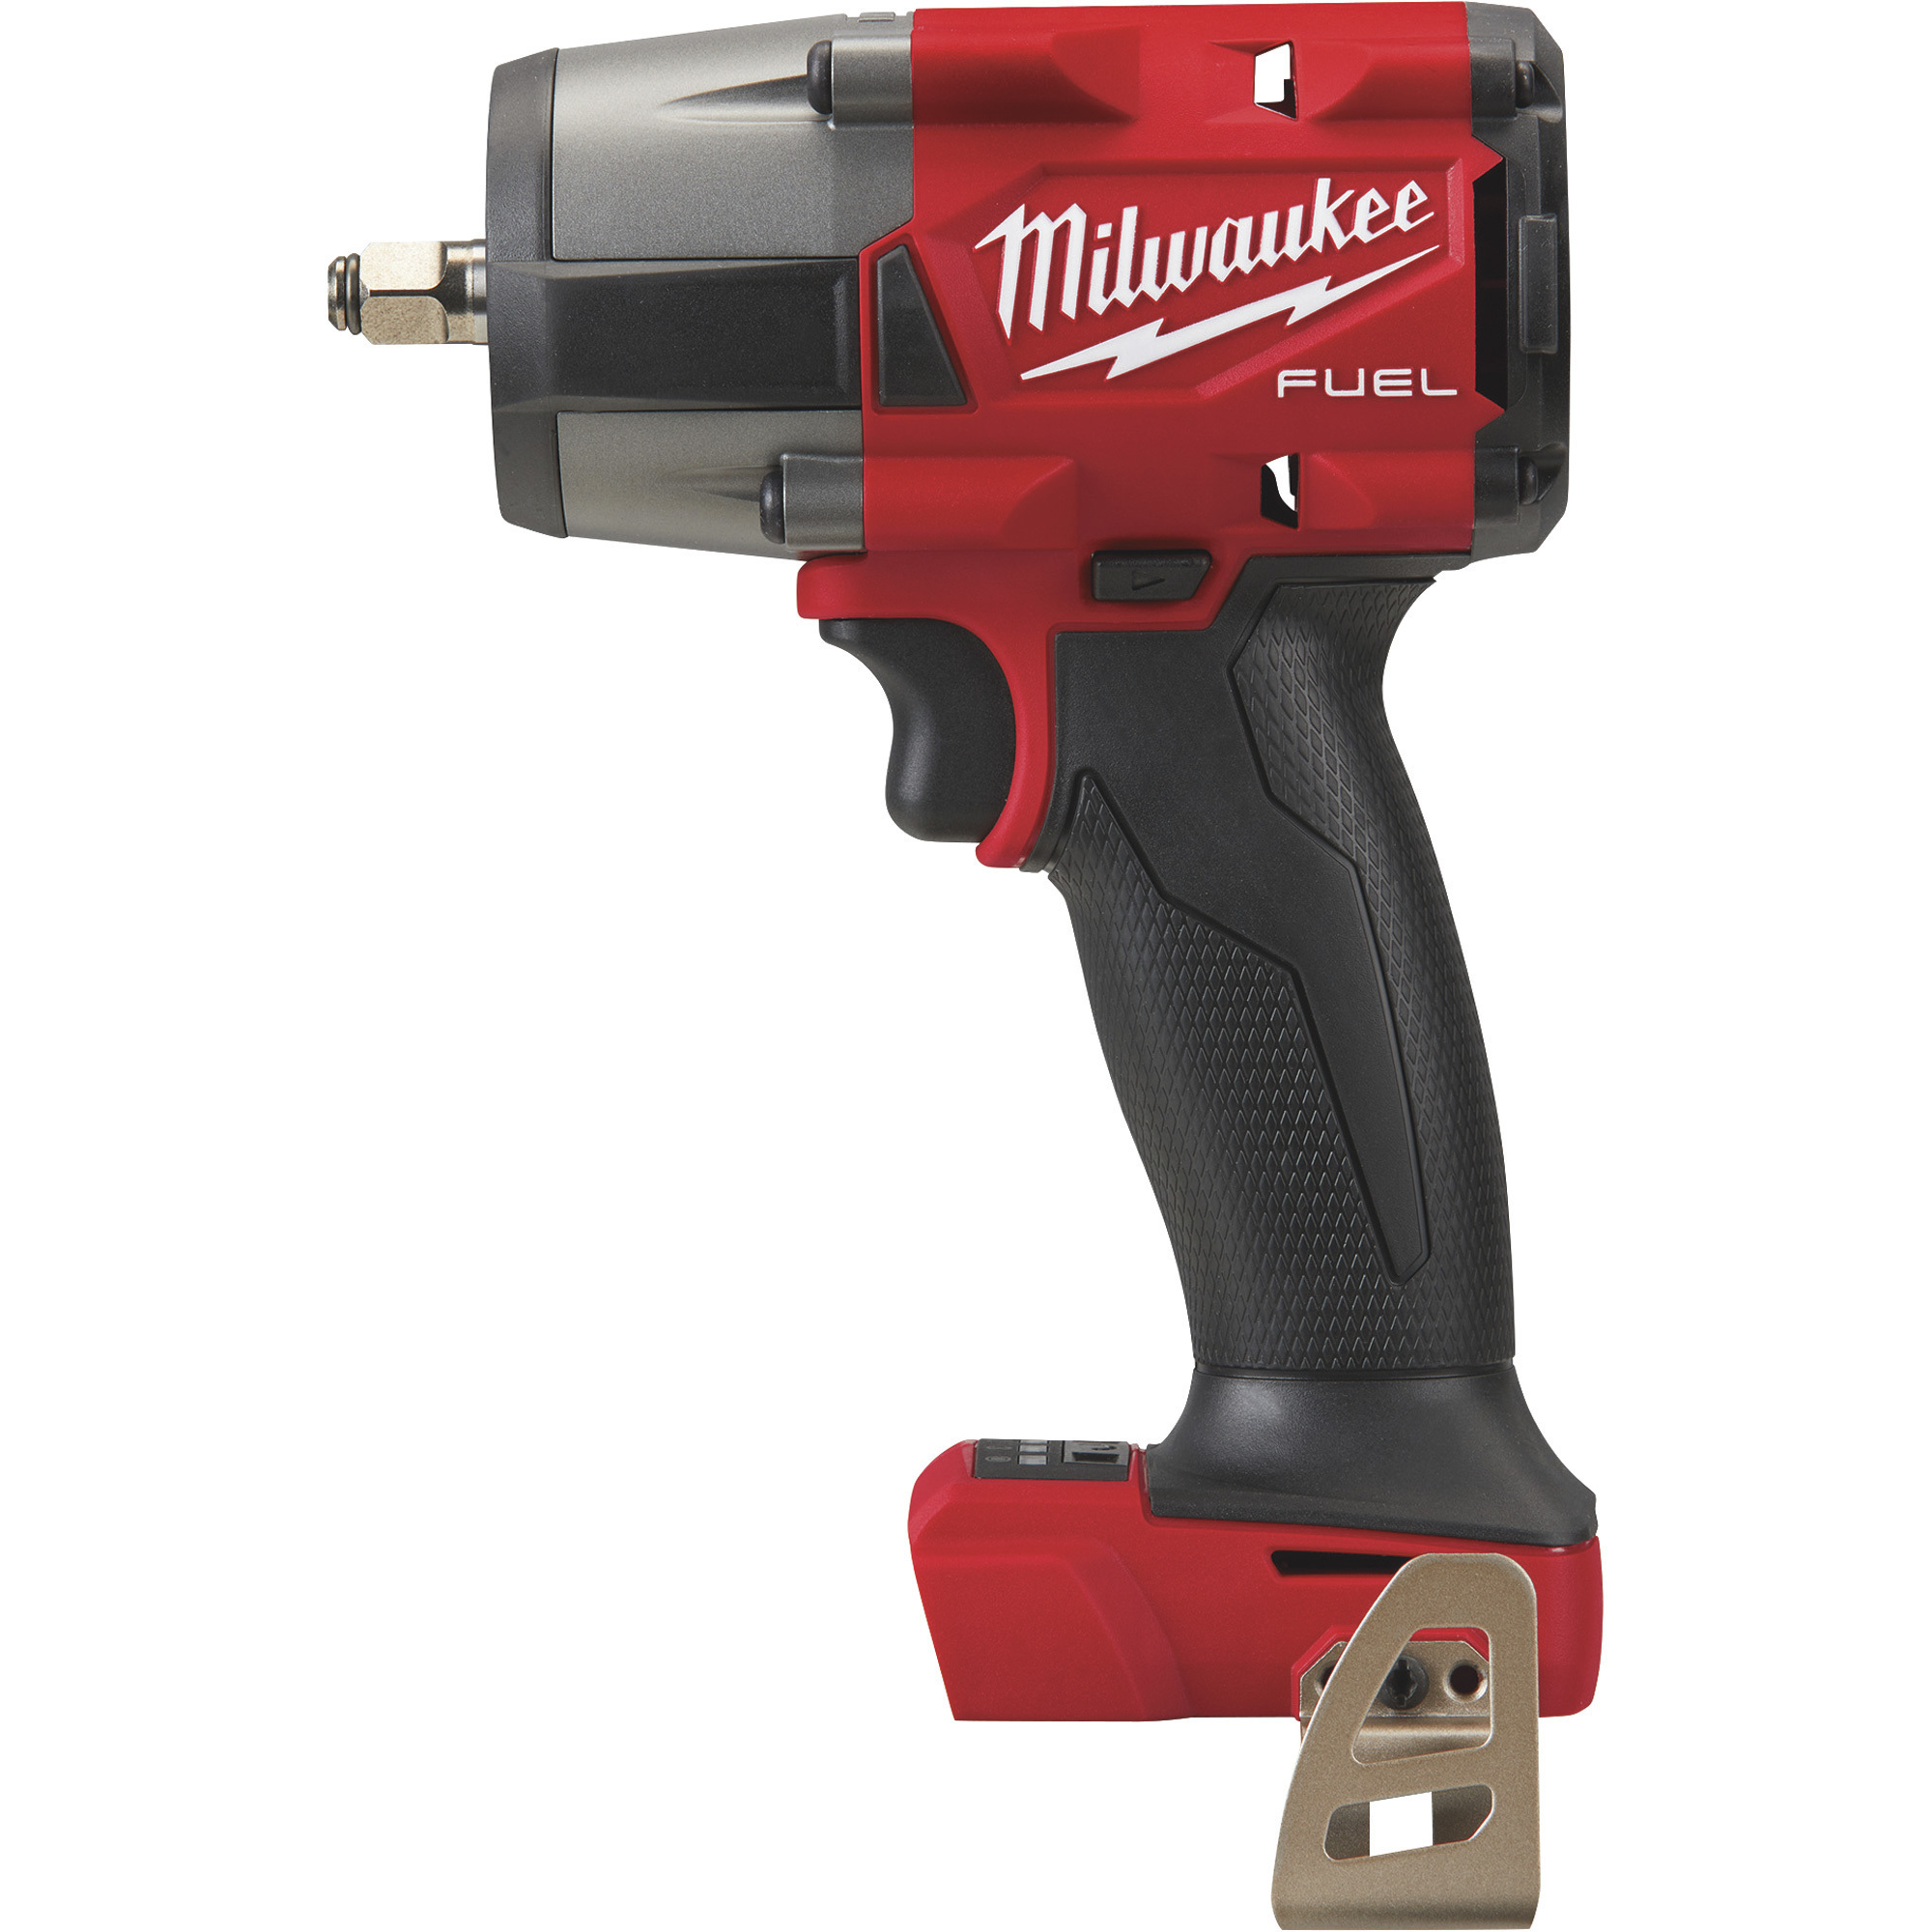 Milwaukee M18 FUEL Mid-Torque Impact Wrench with Friction Ring, Tool Only, 3/8Inch Drive, 600 Ft./Lbs. Torque, Model 2960-20